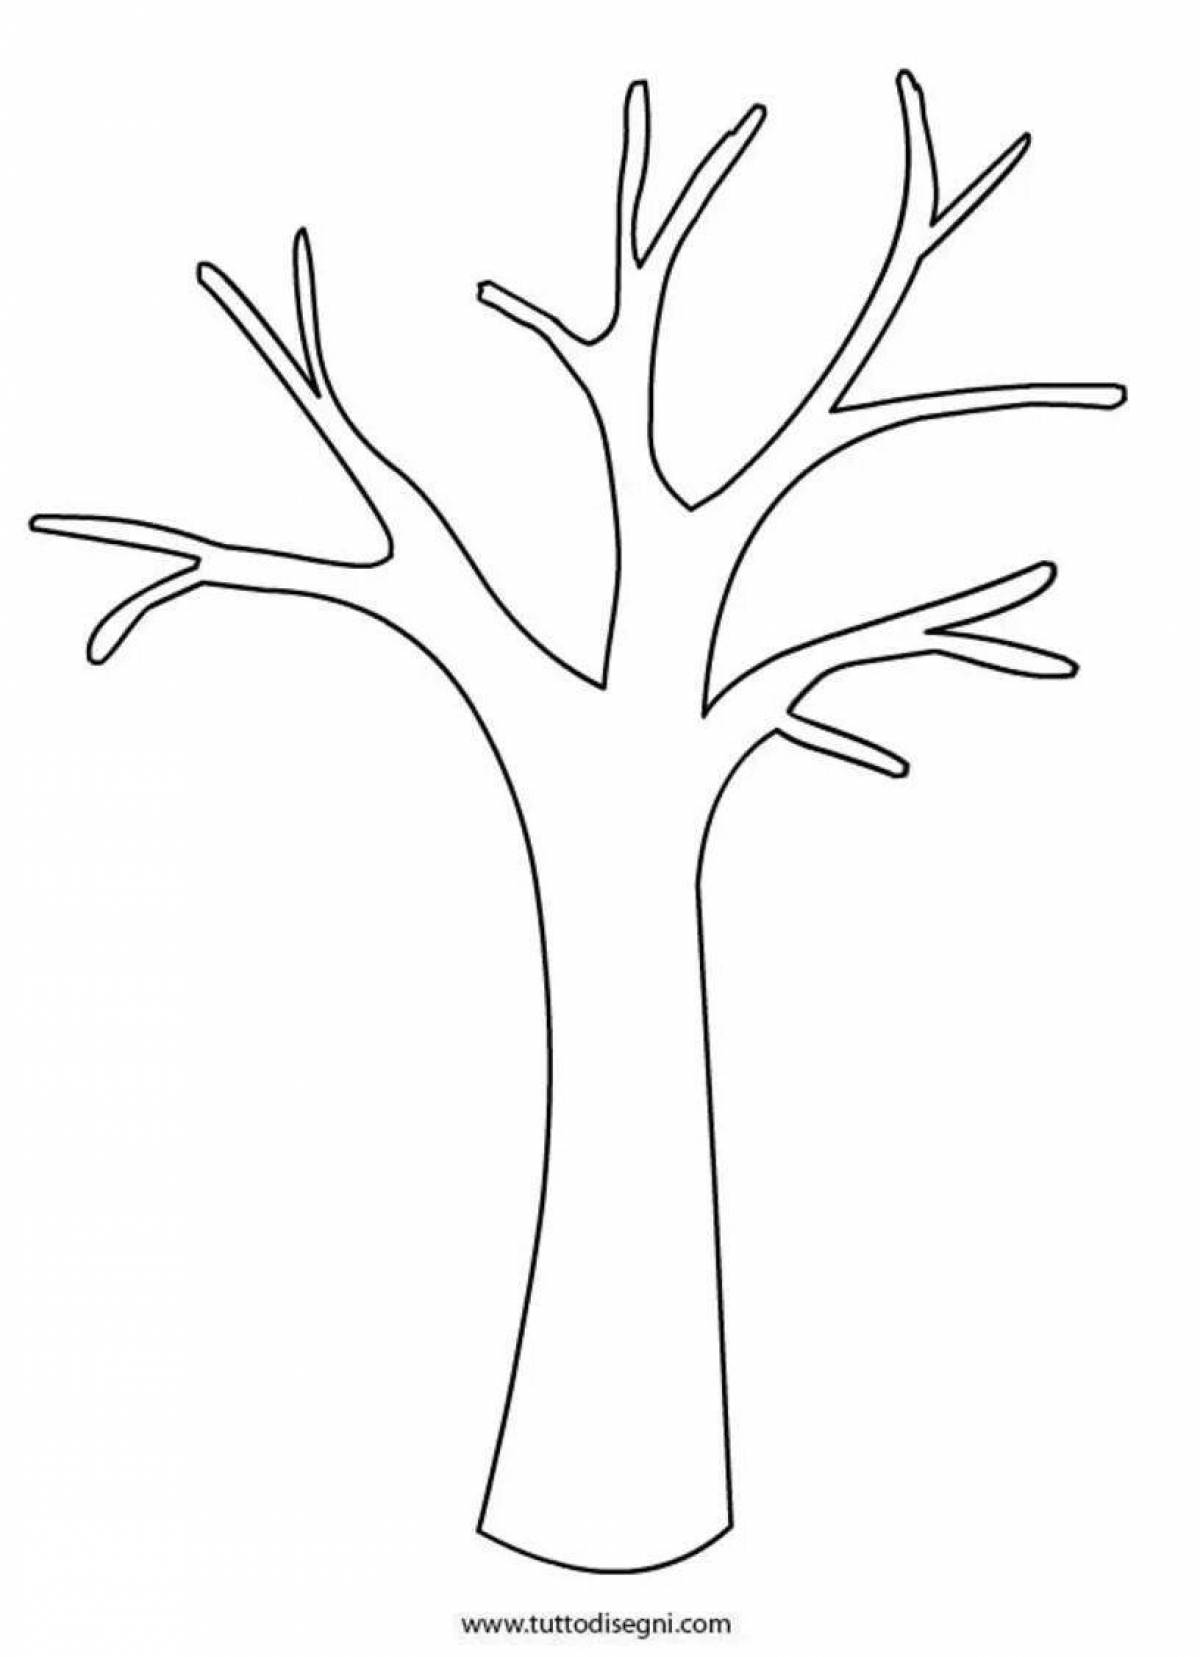 Palace winter tree coloring page